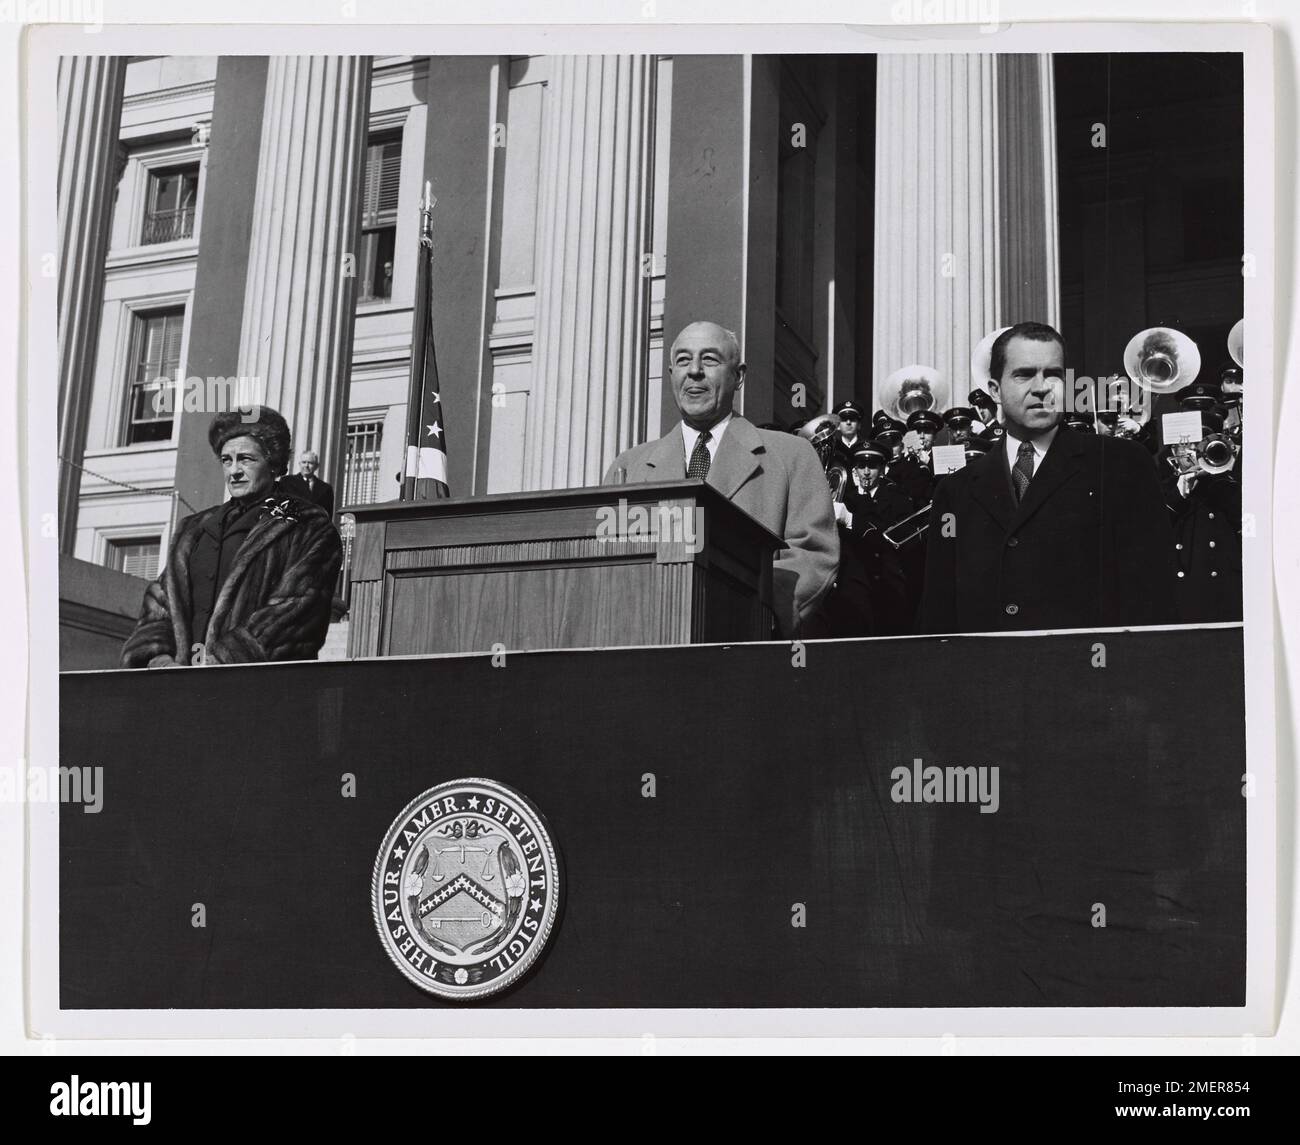 George M. Humphrey and Richard M. Nixon on Opening Day of Alexander Hamilton Bicentennial in Washington, DC. Picture shows George M. Humphrey at podium and Richard Nixon standing to the left of the podium. Stock Photo